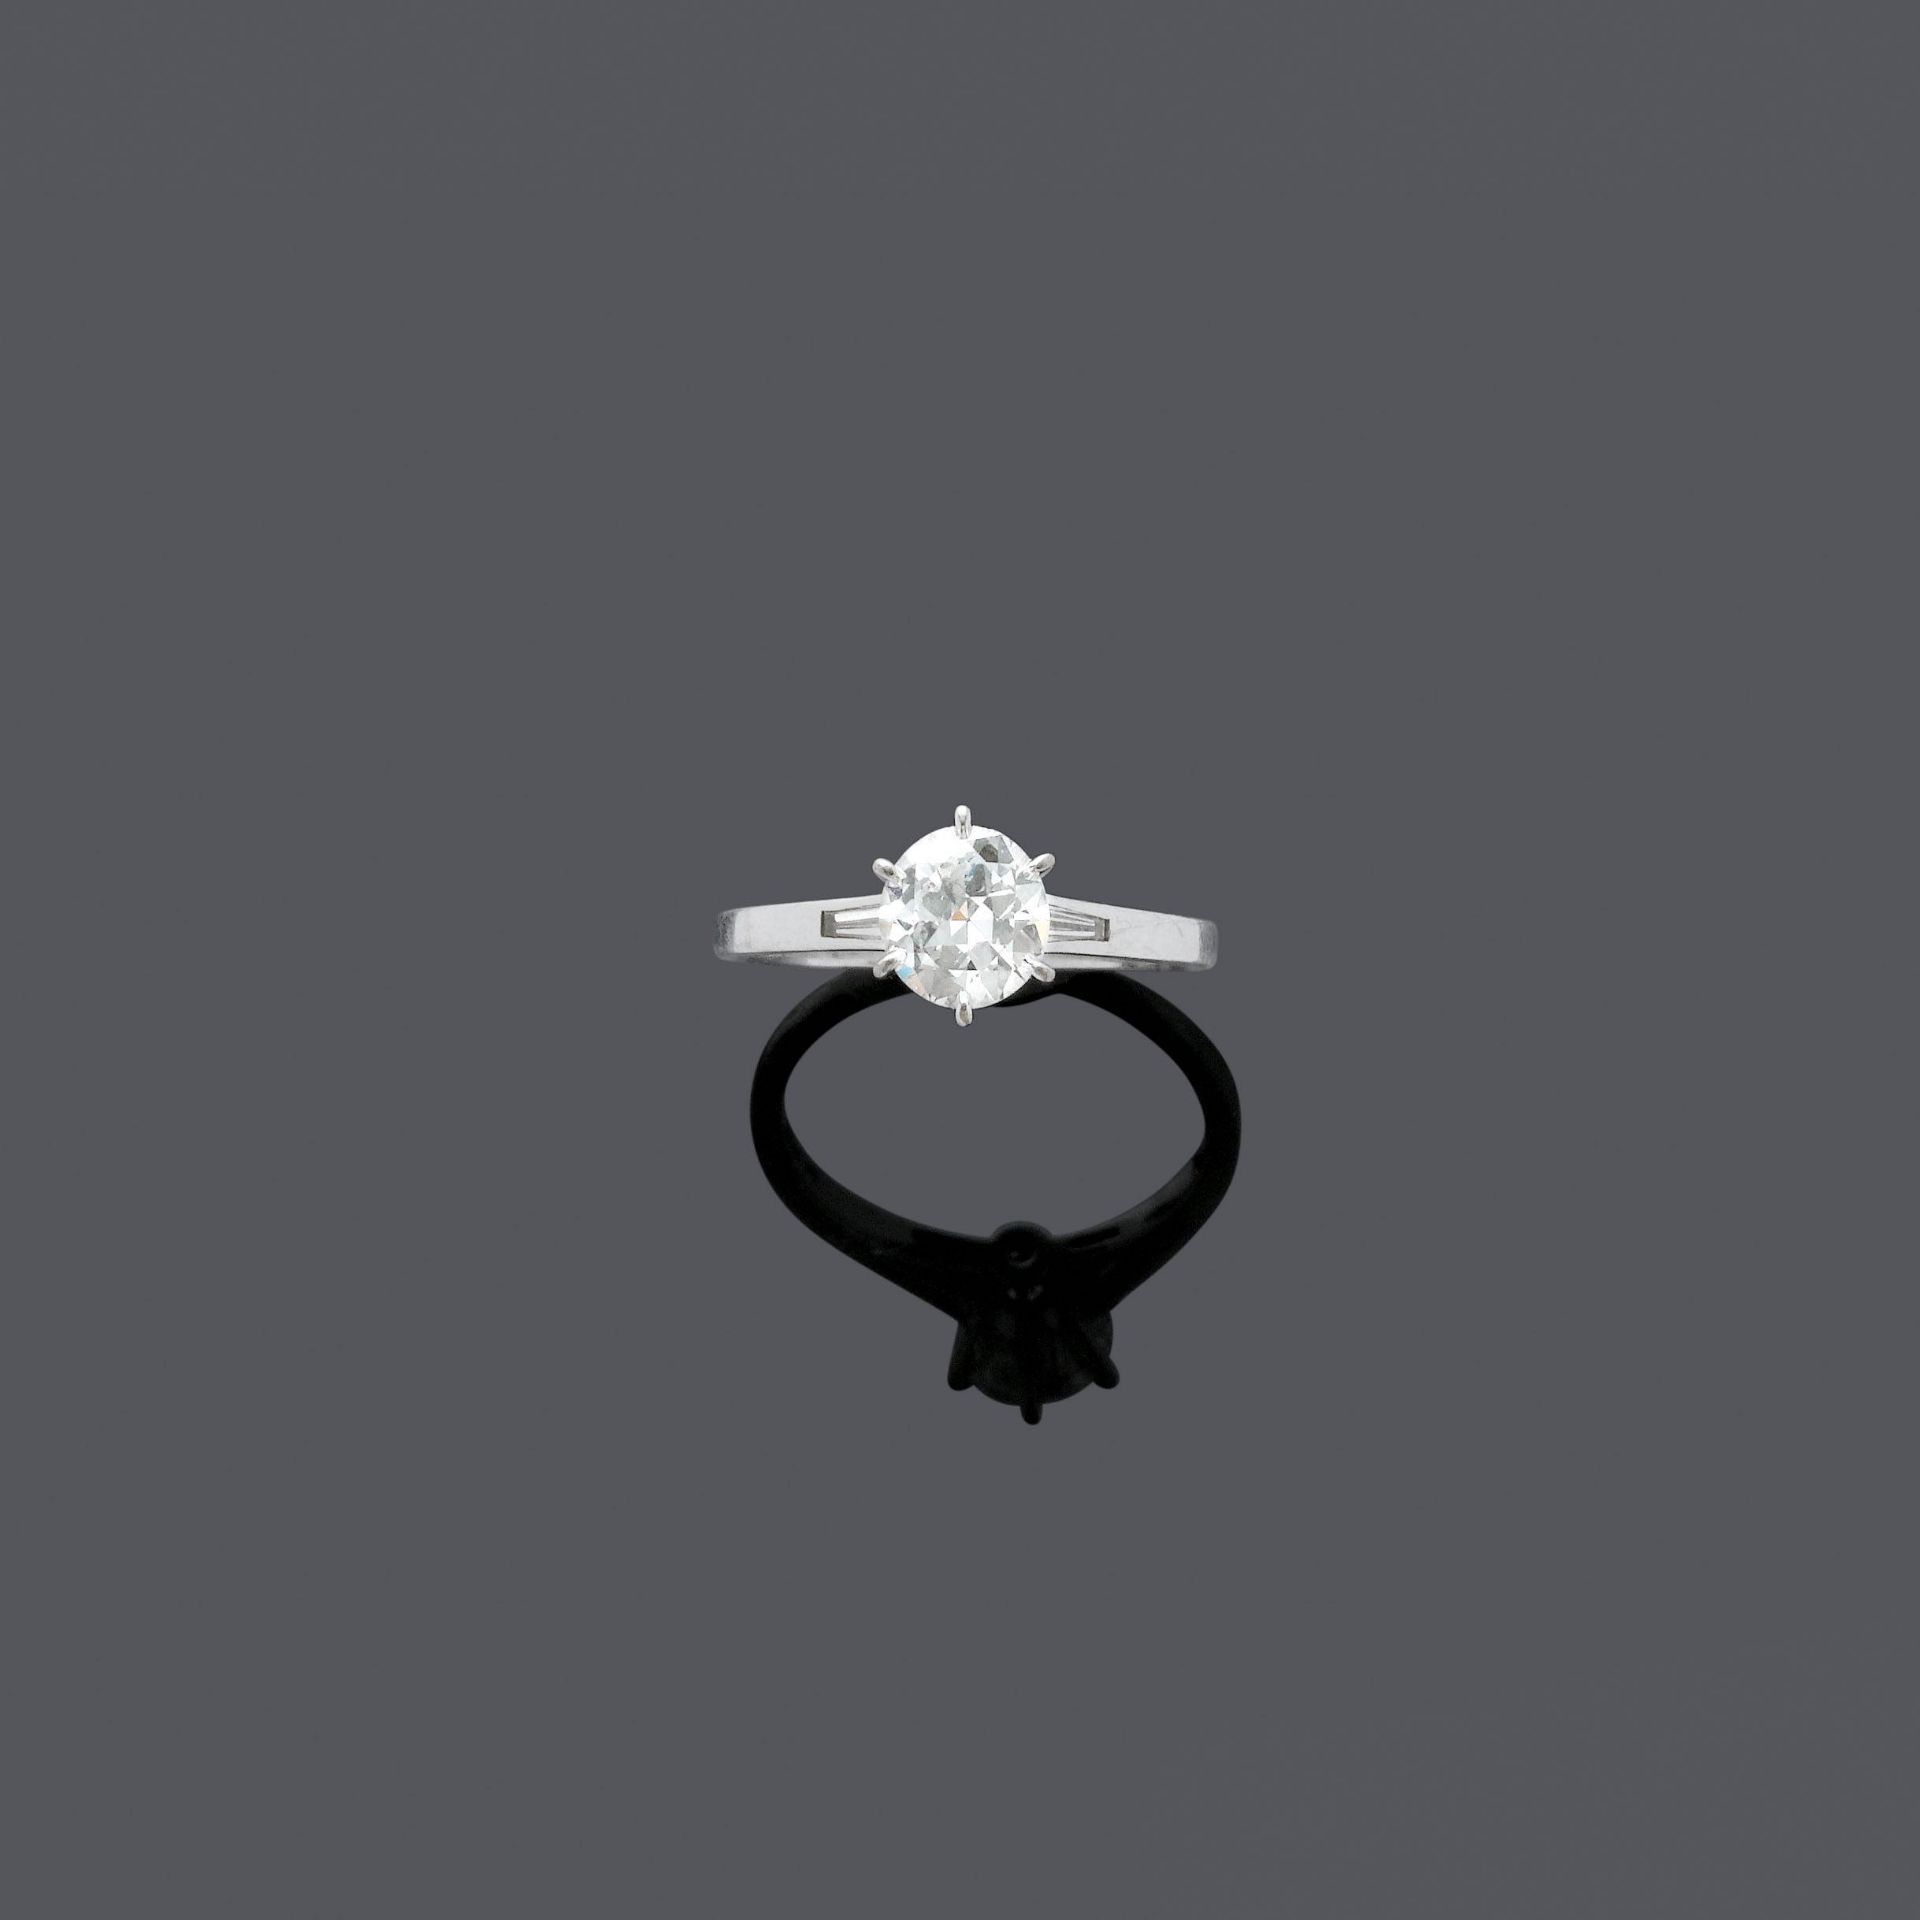 DIAMOND RING, BY MEISTER, ca. 1960.